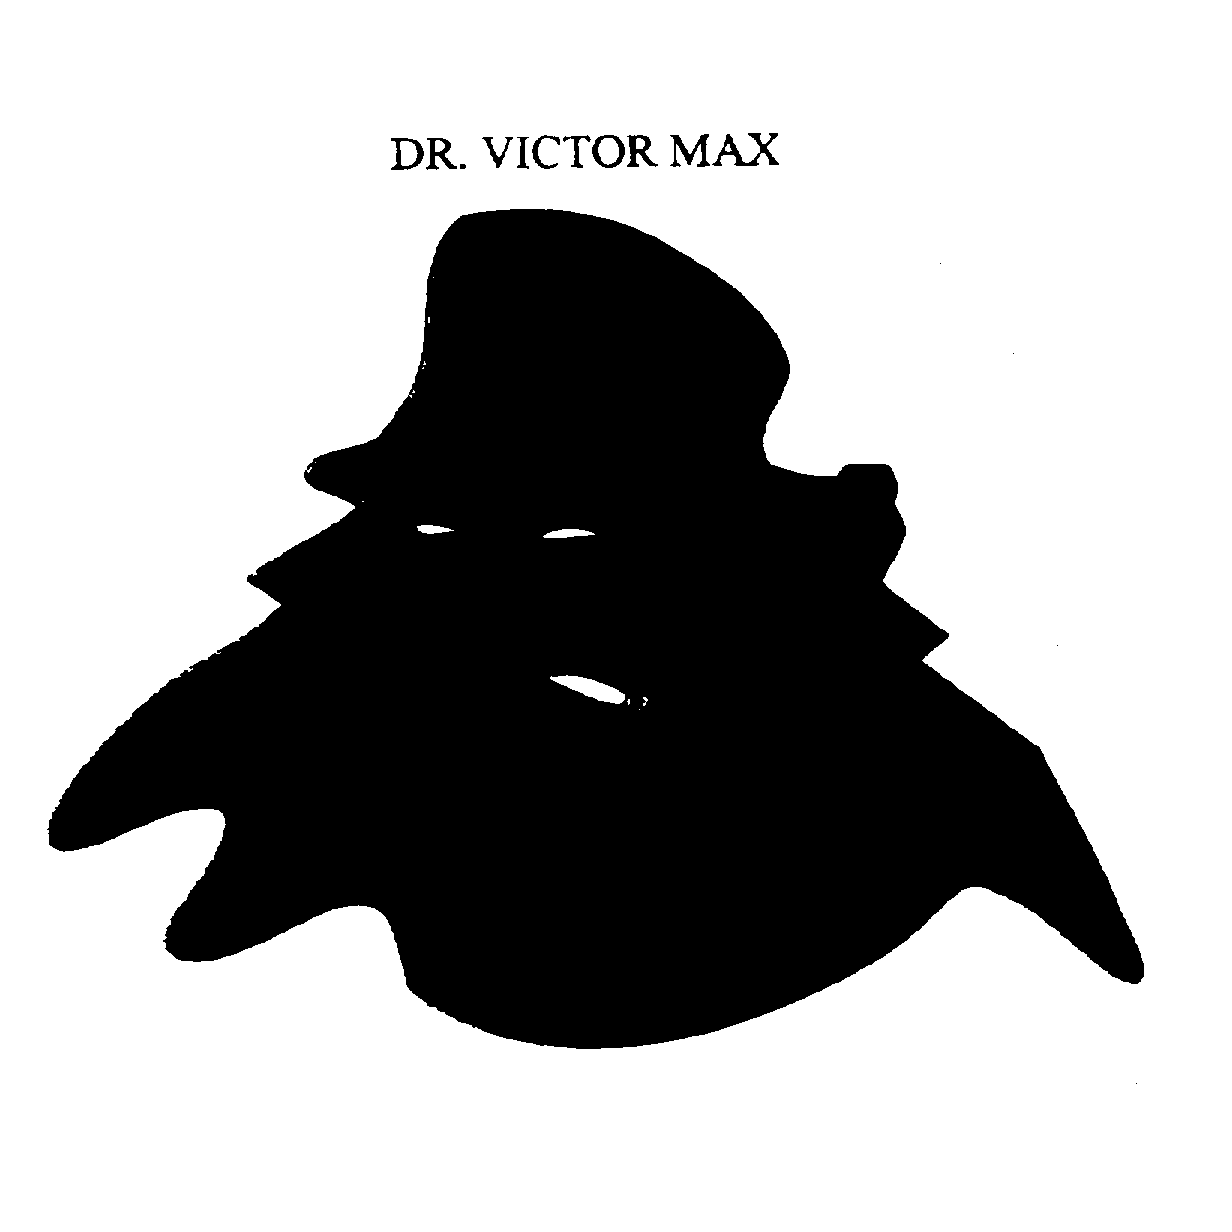  DR. VICTOR MAX